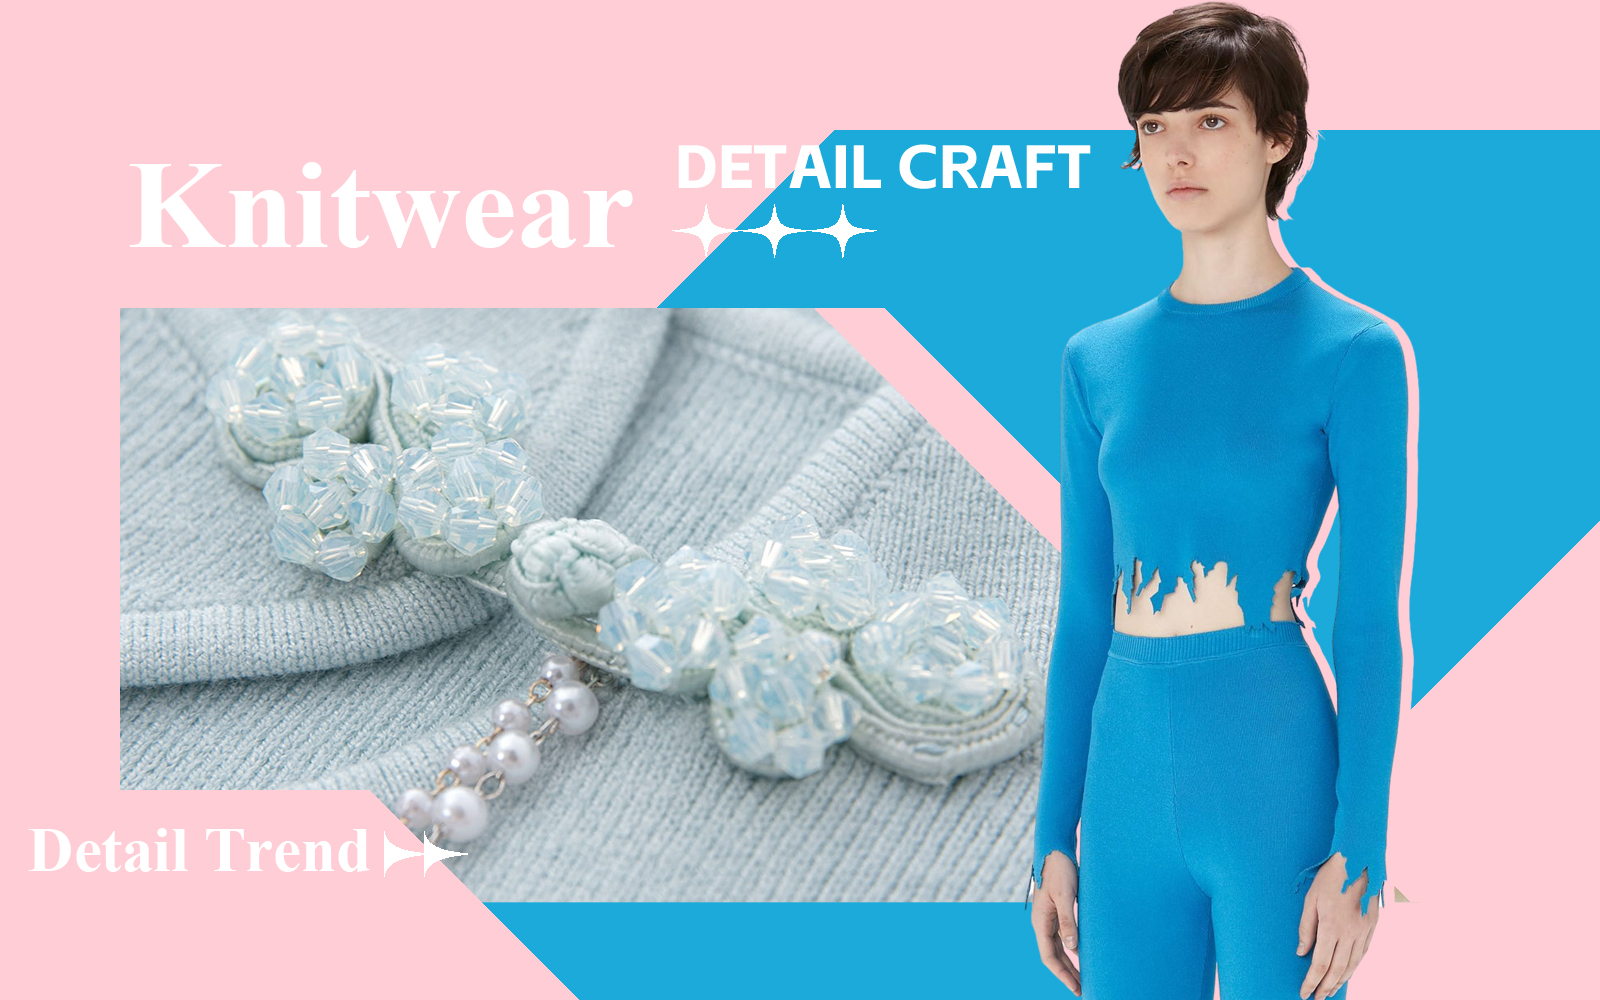 The Detail & Craft Trend for Women's Knitwear